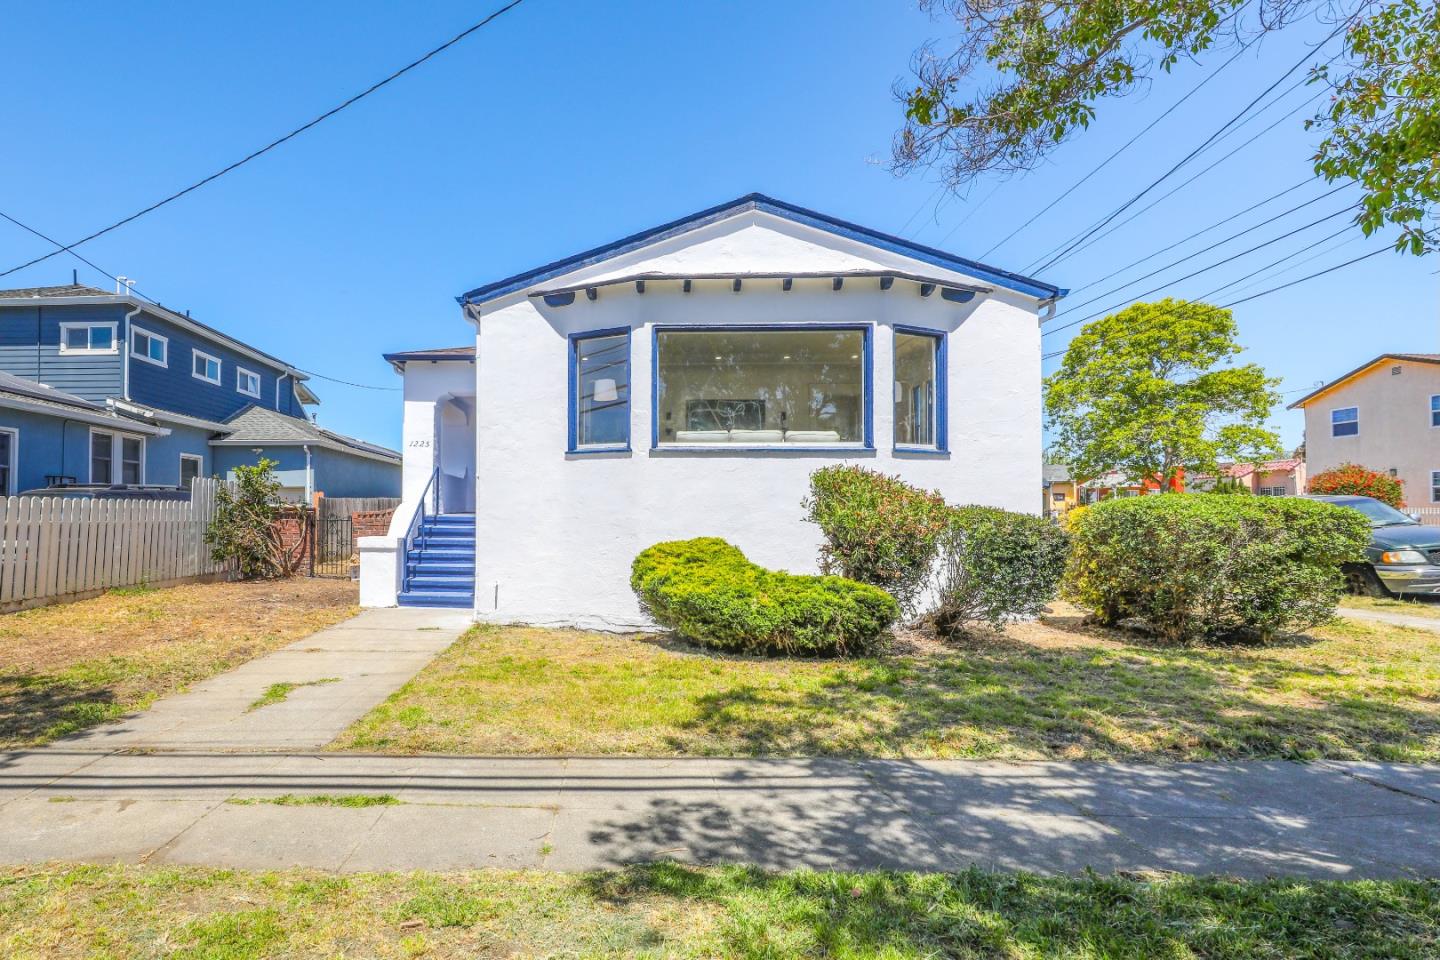 Photo of 1225 Roosevelt Ave in Richmond, CA